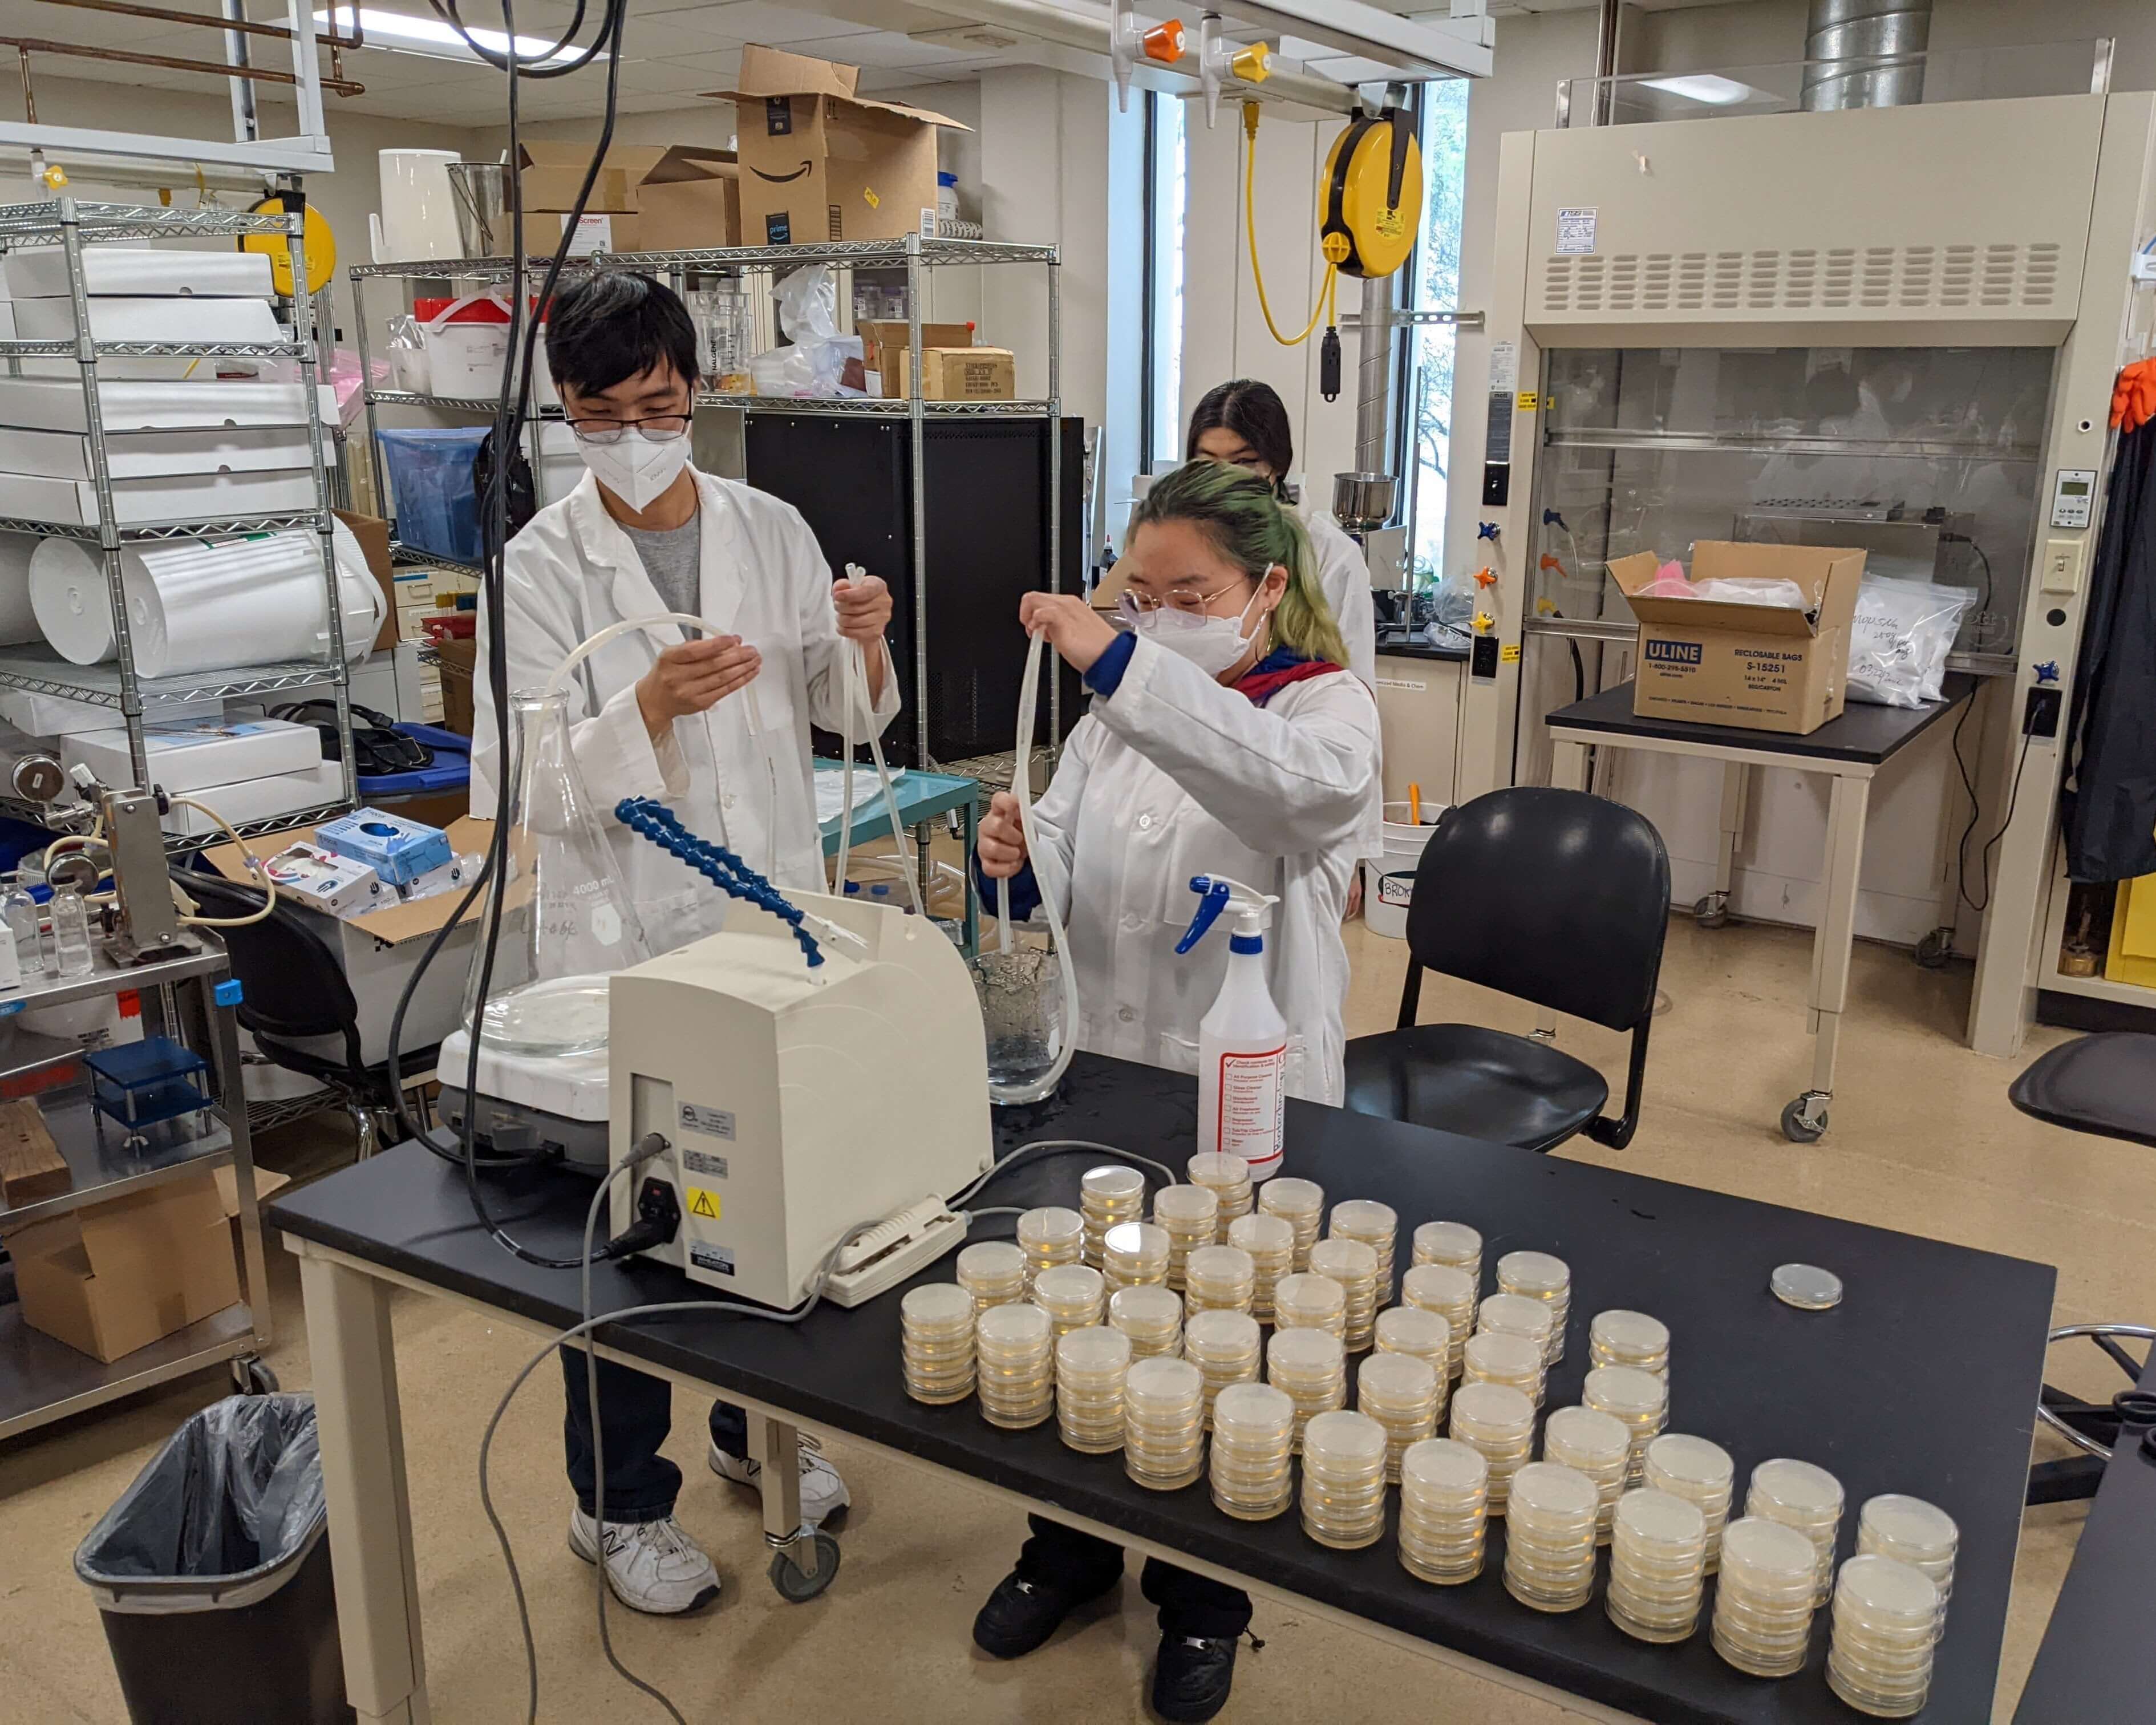 Three students in lab coats handle lab equipment and petri dishes